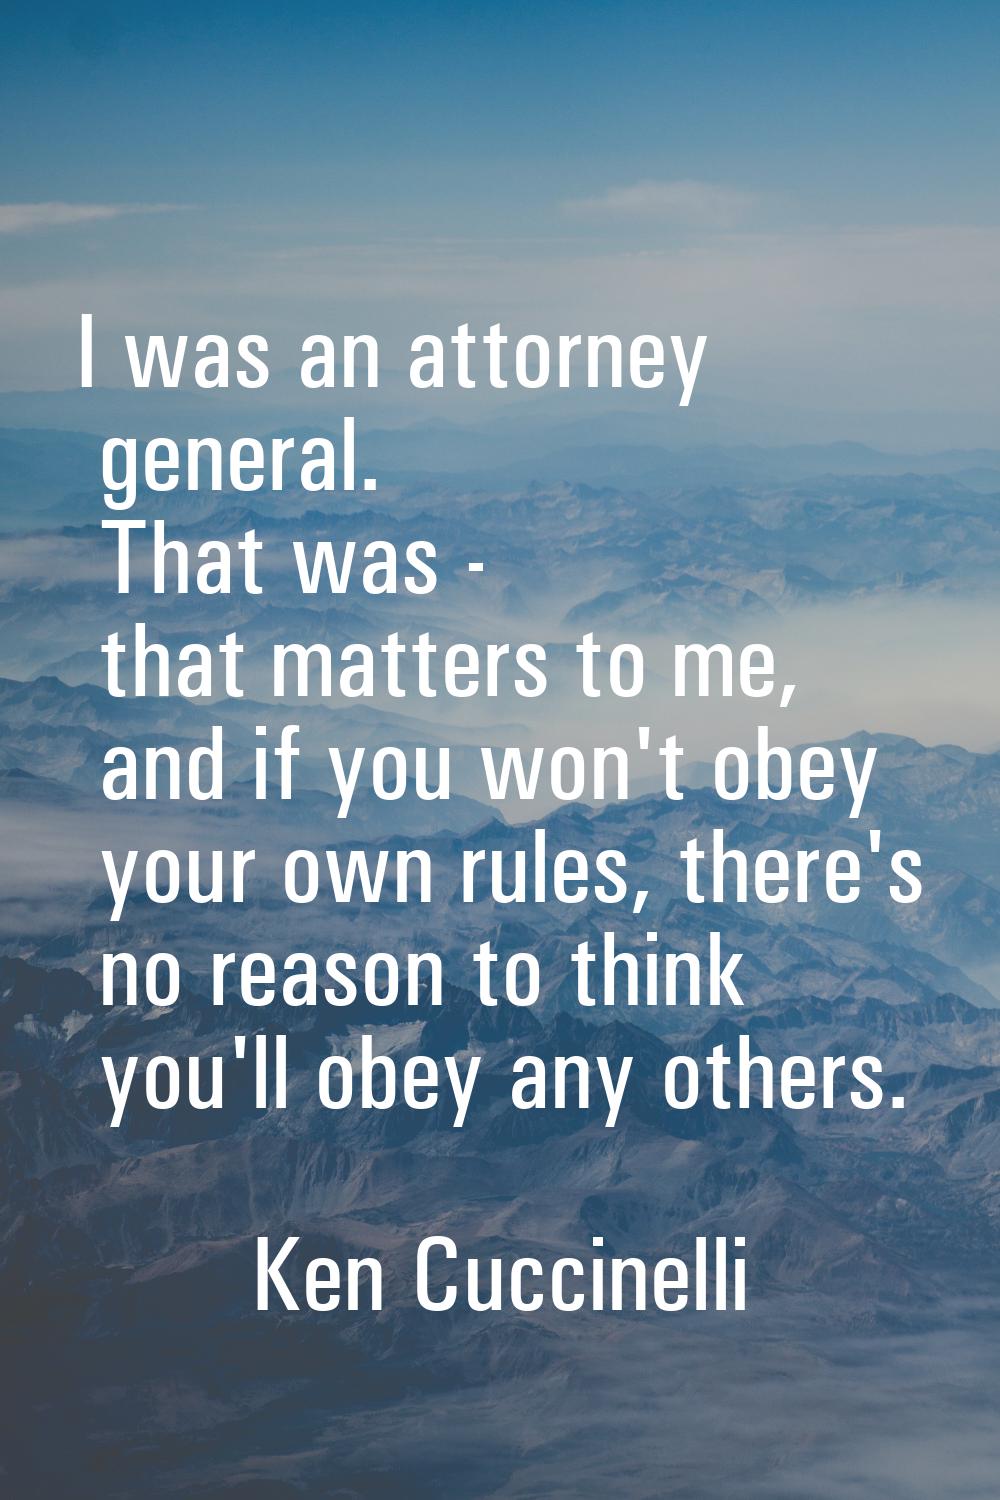 I was an attorney general. That was - that matters to me, and if you won't obey your own rules, the